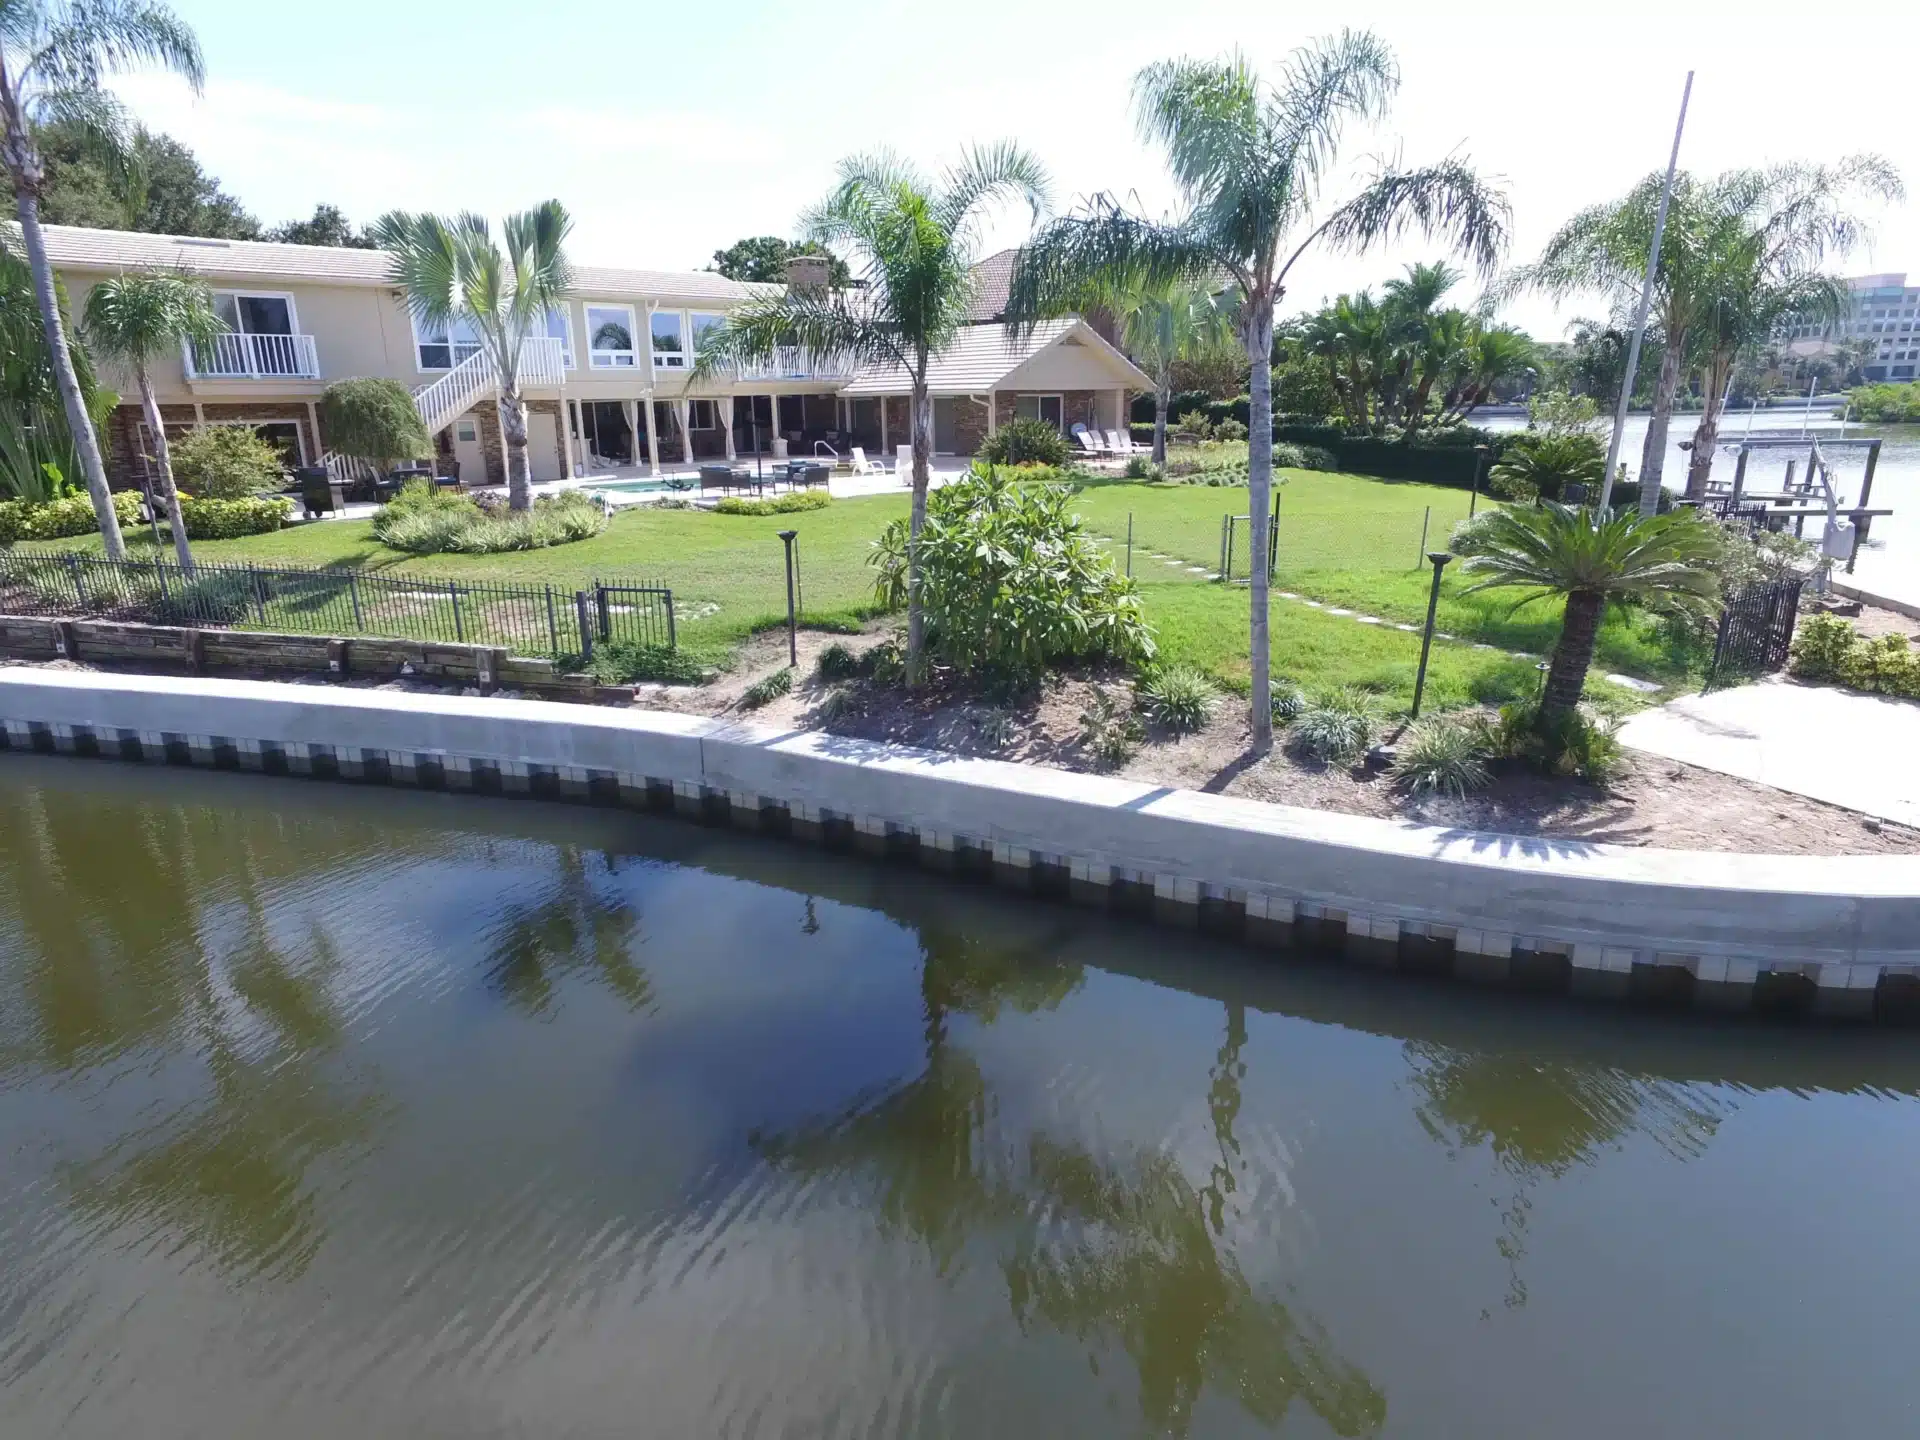 vinyl seawall in front of florida home